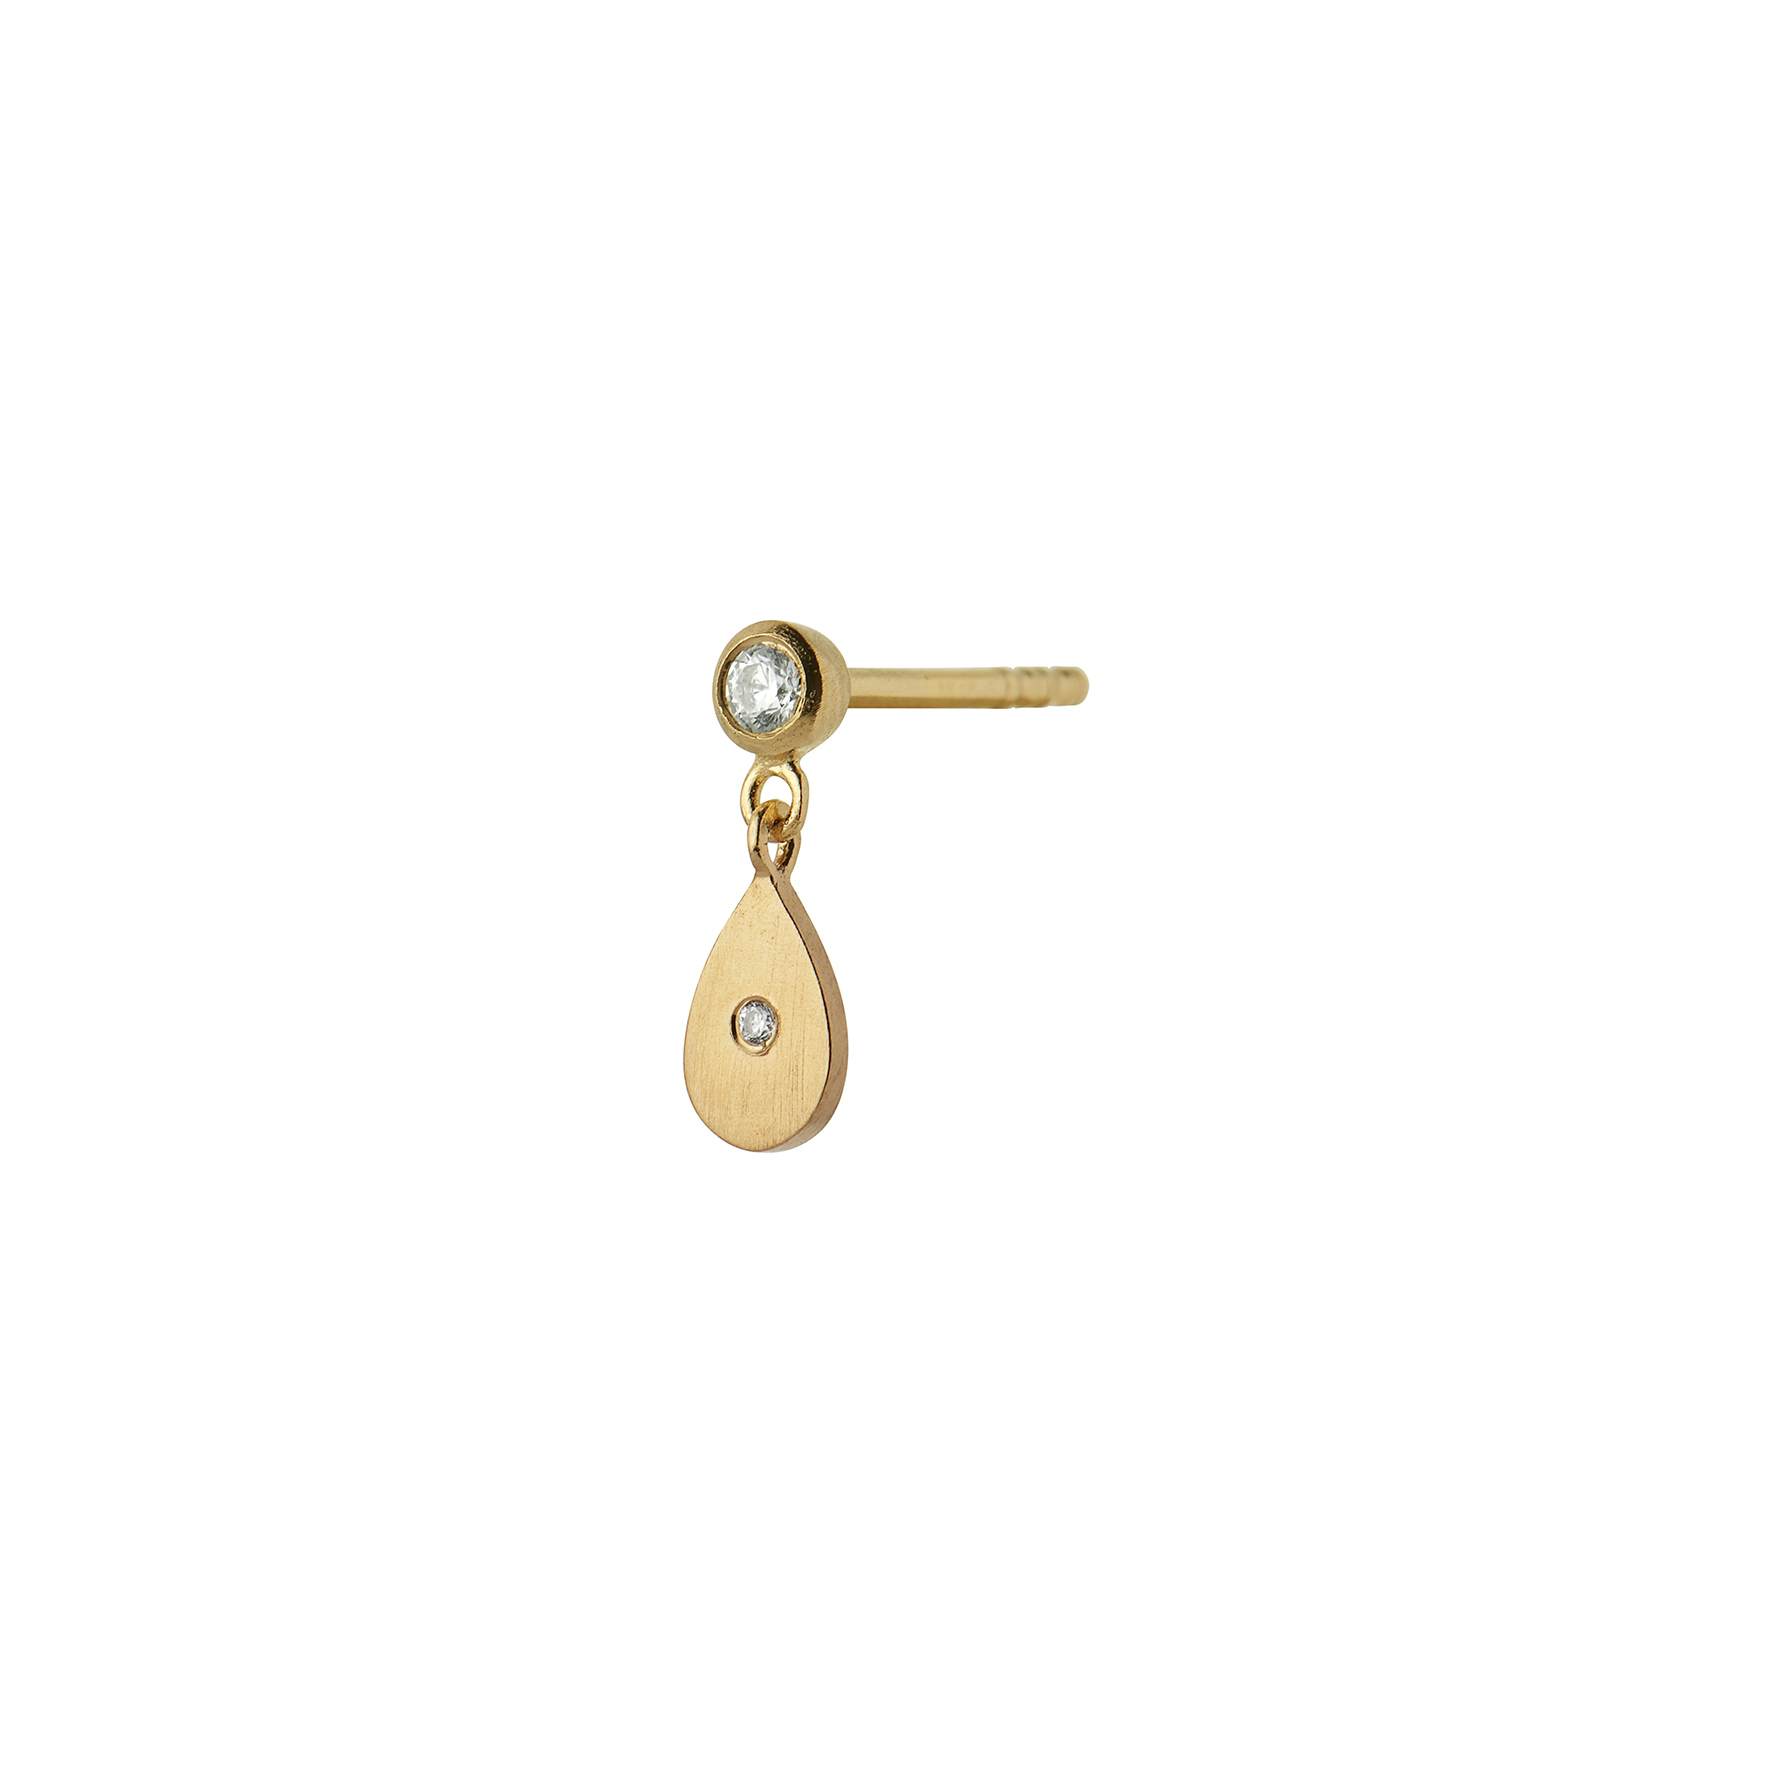 Big Dot with Sparkling Teardrop Earring from STINE A Jewelry in Goldplated-Silver Sterling 925